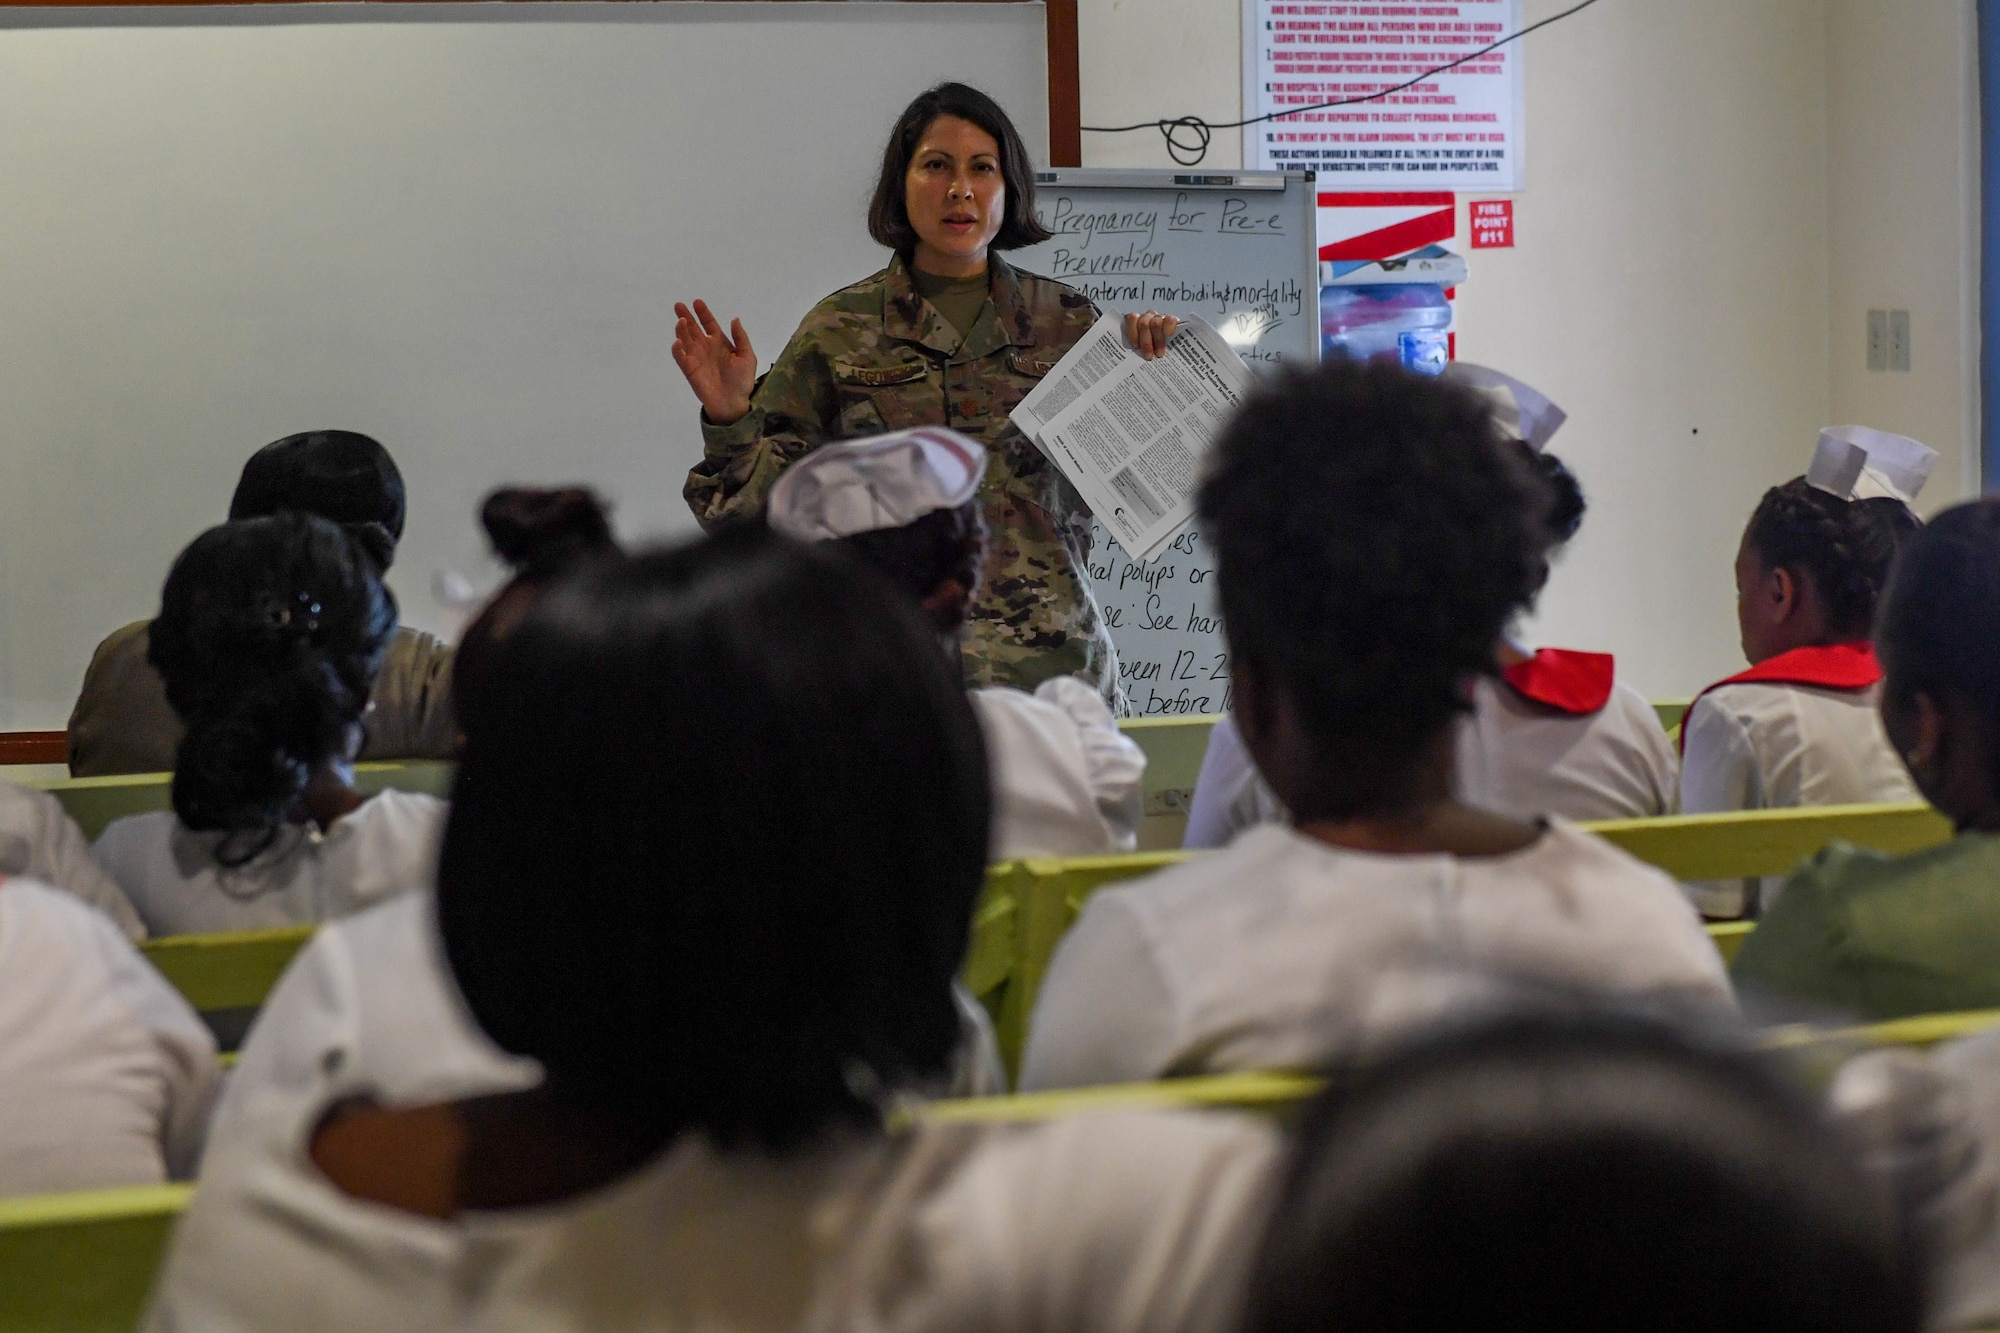 U.S. Air Force Maj. Melissa Legowski, nurse practitioner from the 99th Medical Group at Nellis Air Force Base, briefs Guyanese nurses during a lecture at the Linden Mackenzie Hospital during New Horizons exercise 2019 in Linden, Guyana, June 13, 2019.  The New Horizons exercise 2019 provides U.S. military members an opportunity to train for an overseas deployment and the logistical requirements it entails. The exercise promotes bilateral cooperation by providing opportunities for U.S. and partner nation military engineers, medical personnel and support staff to work and train side by side. (U.S. Air Force photo by Senior Airman Derek Seifert)